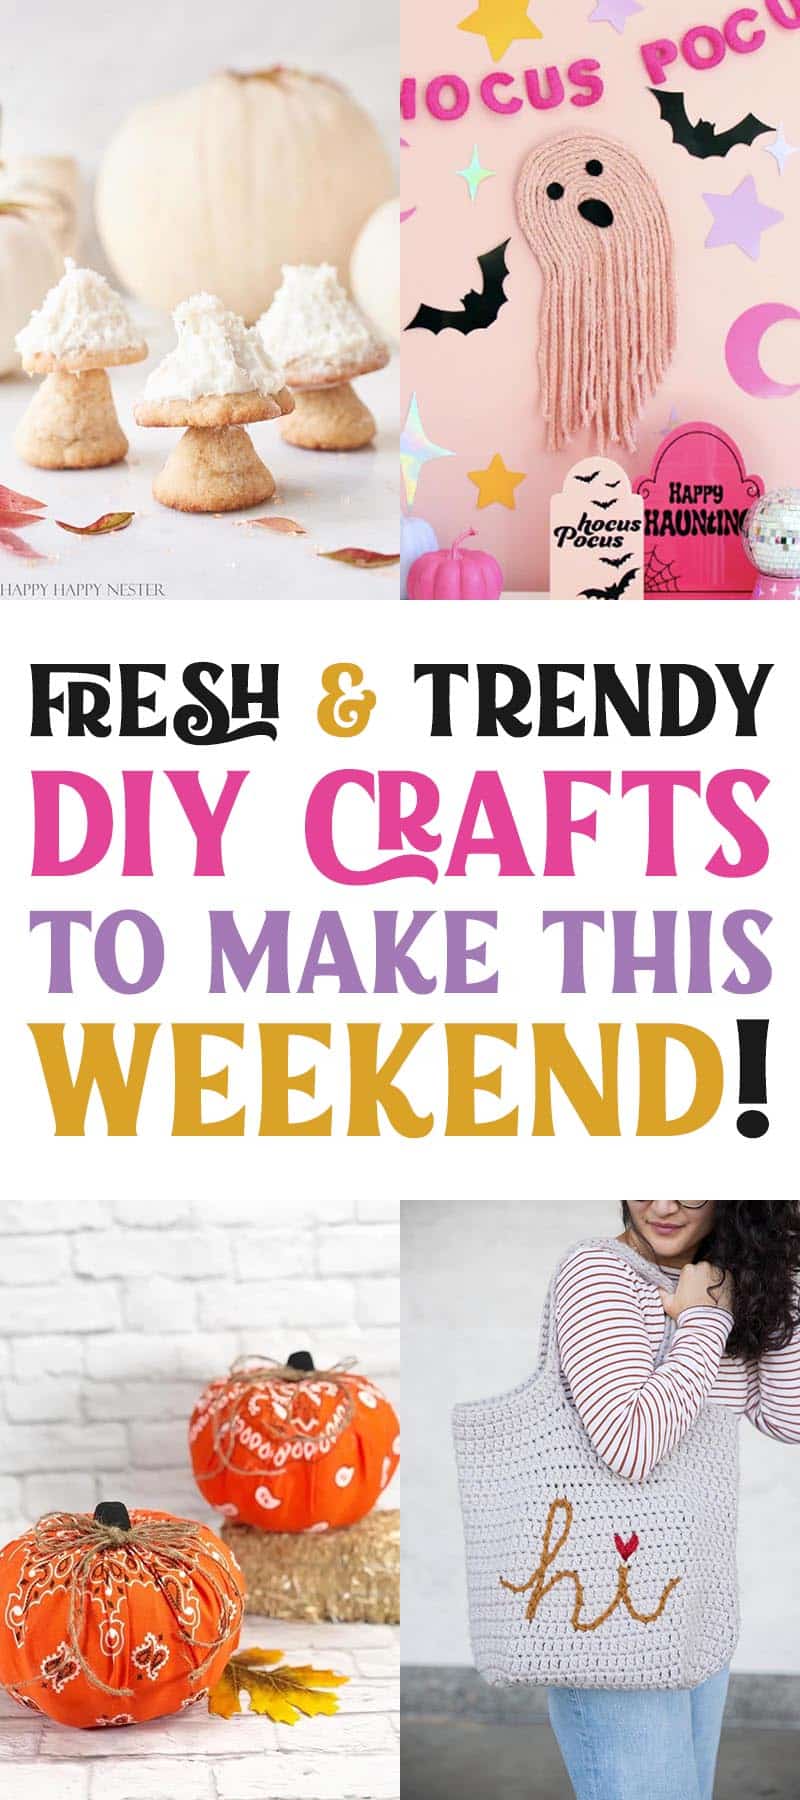 Explore trendy DIY crafts for a creative weekend! From rustic decor to kids' projects, our curated list has it all. Get inspired now!